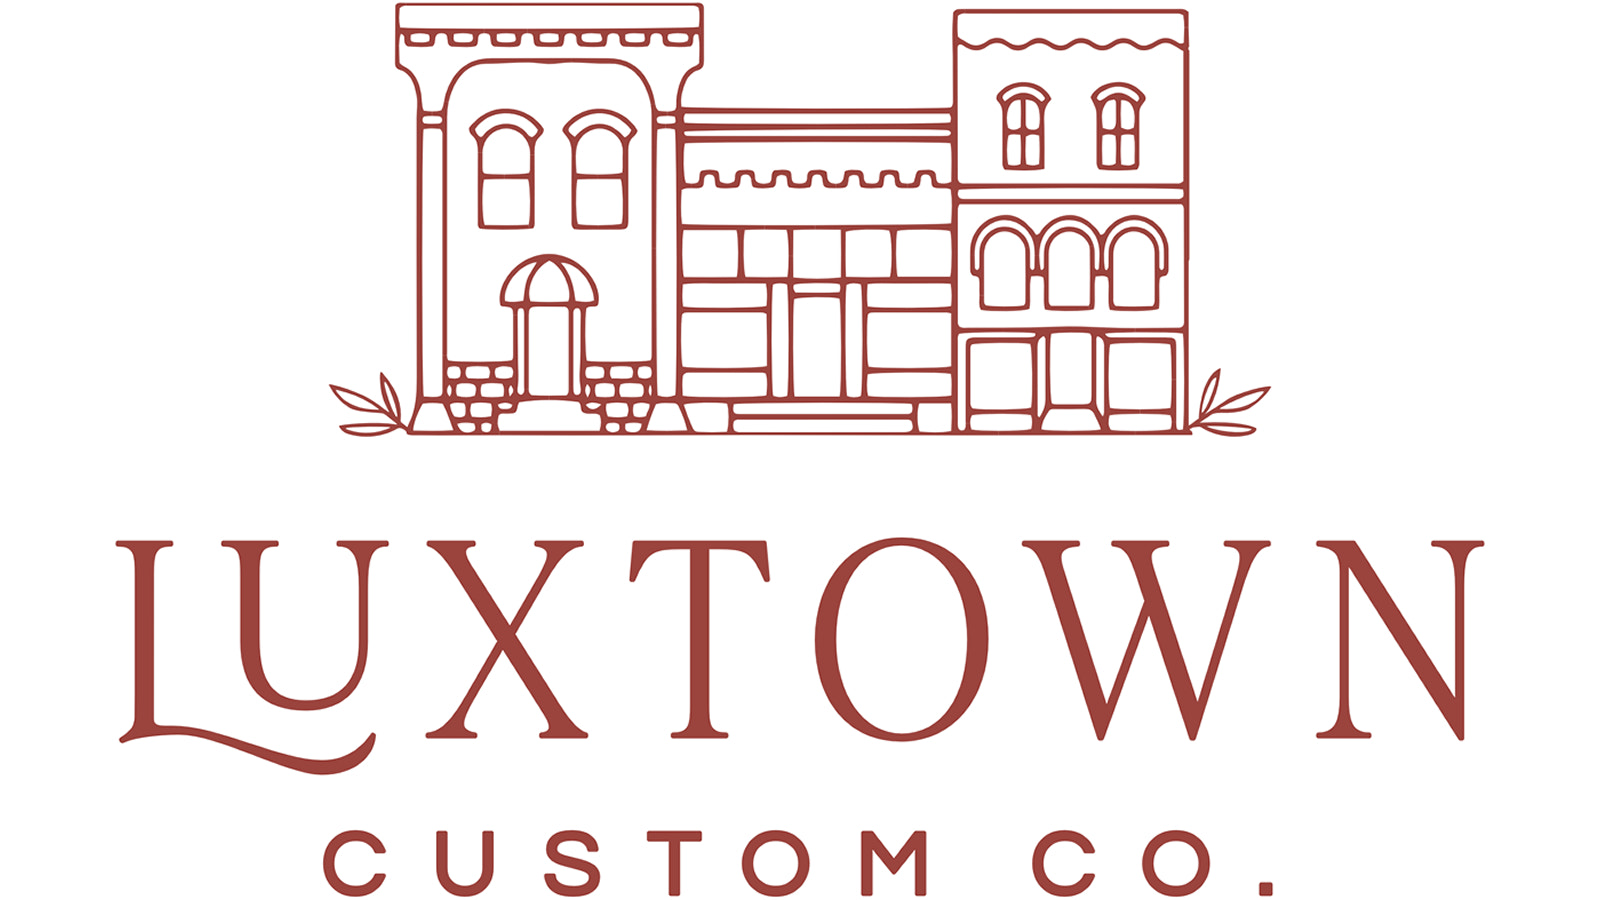 Luxtown custom products: little luxuries at practical prices